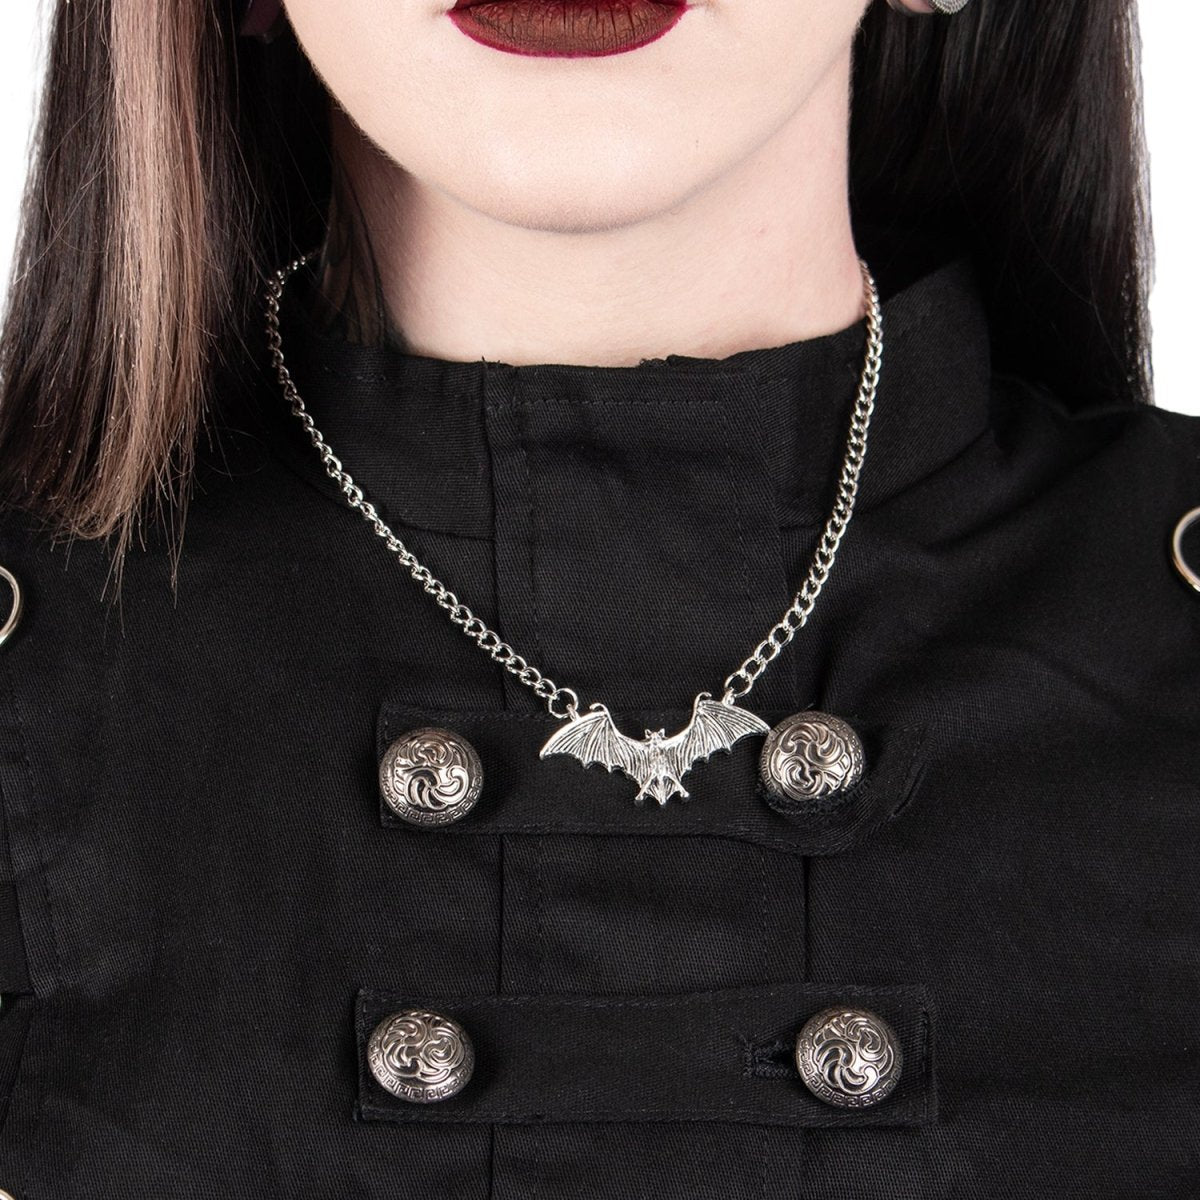 Too Fast | Switchblade Stiletto | Bat Necklace